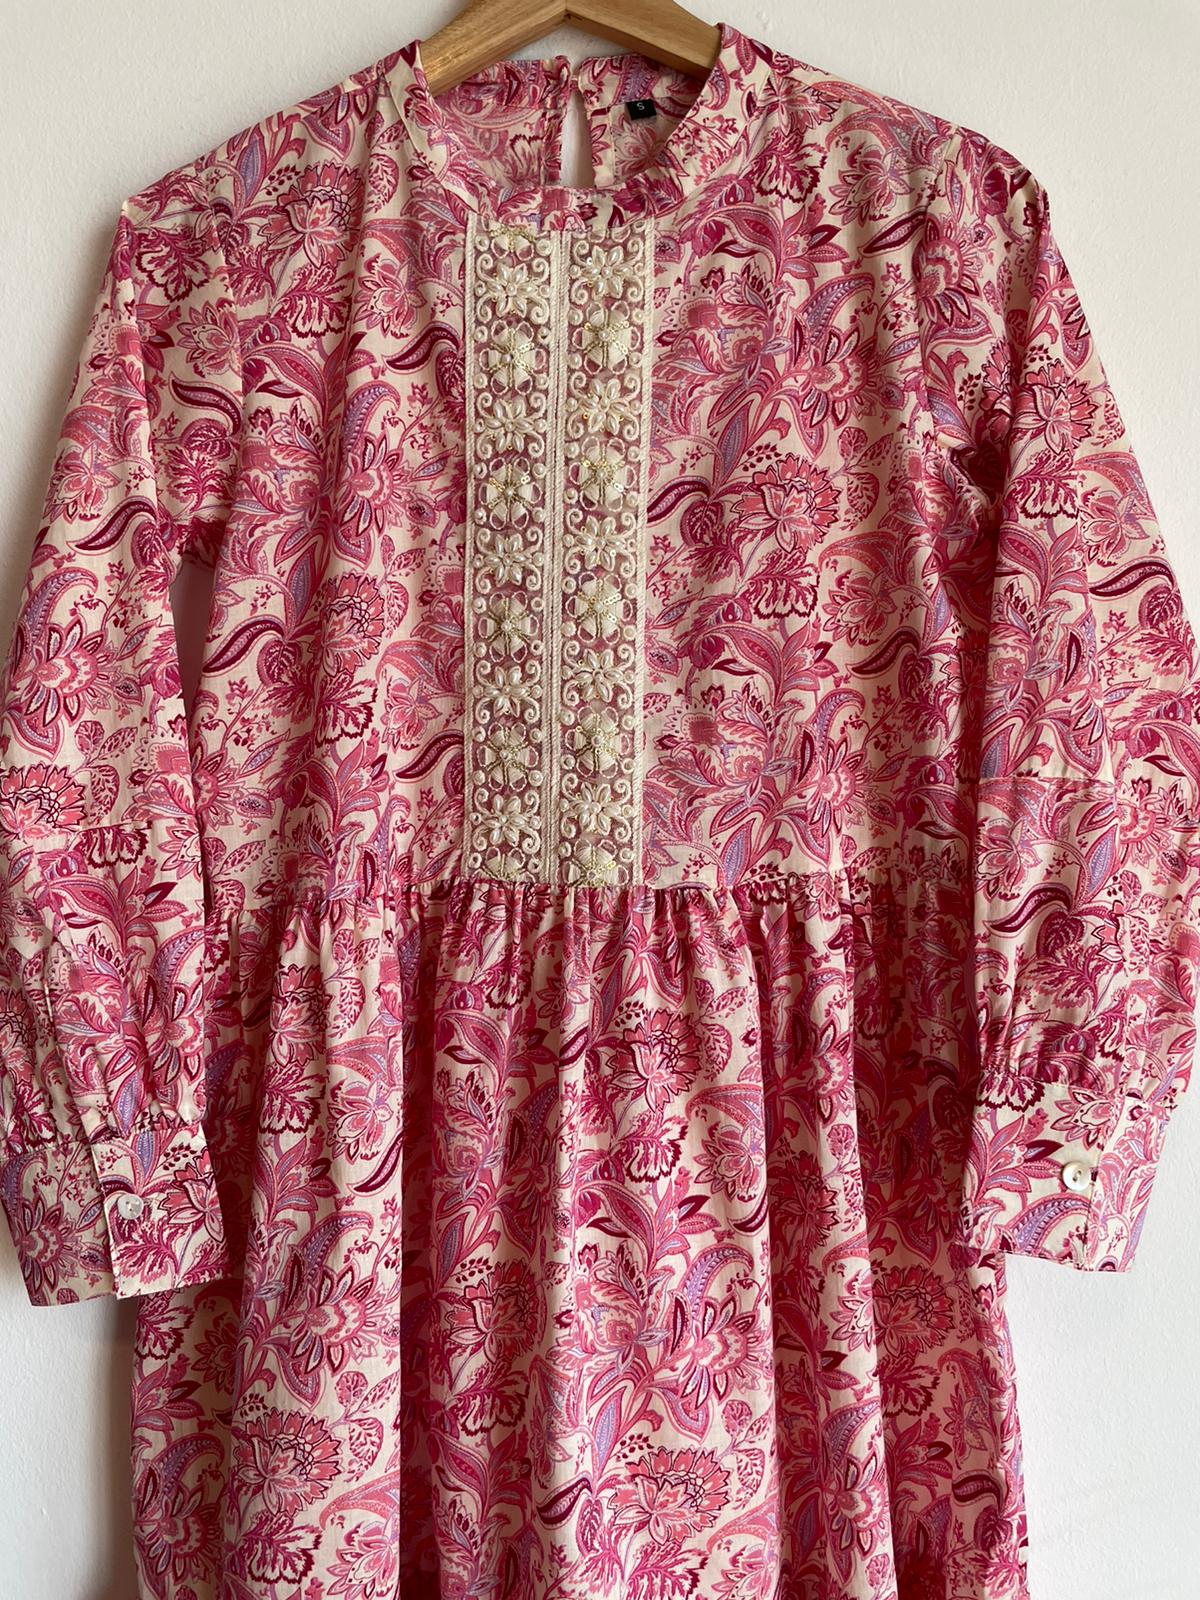 handmade block printed pink and white dress for women in singapore